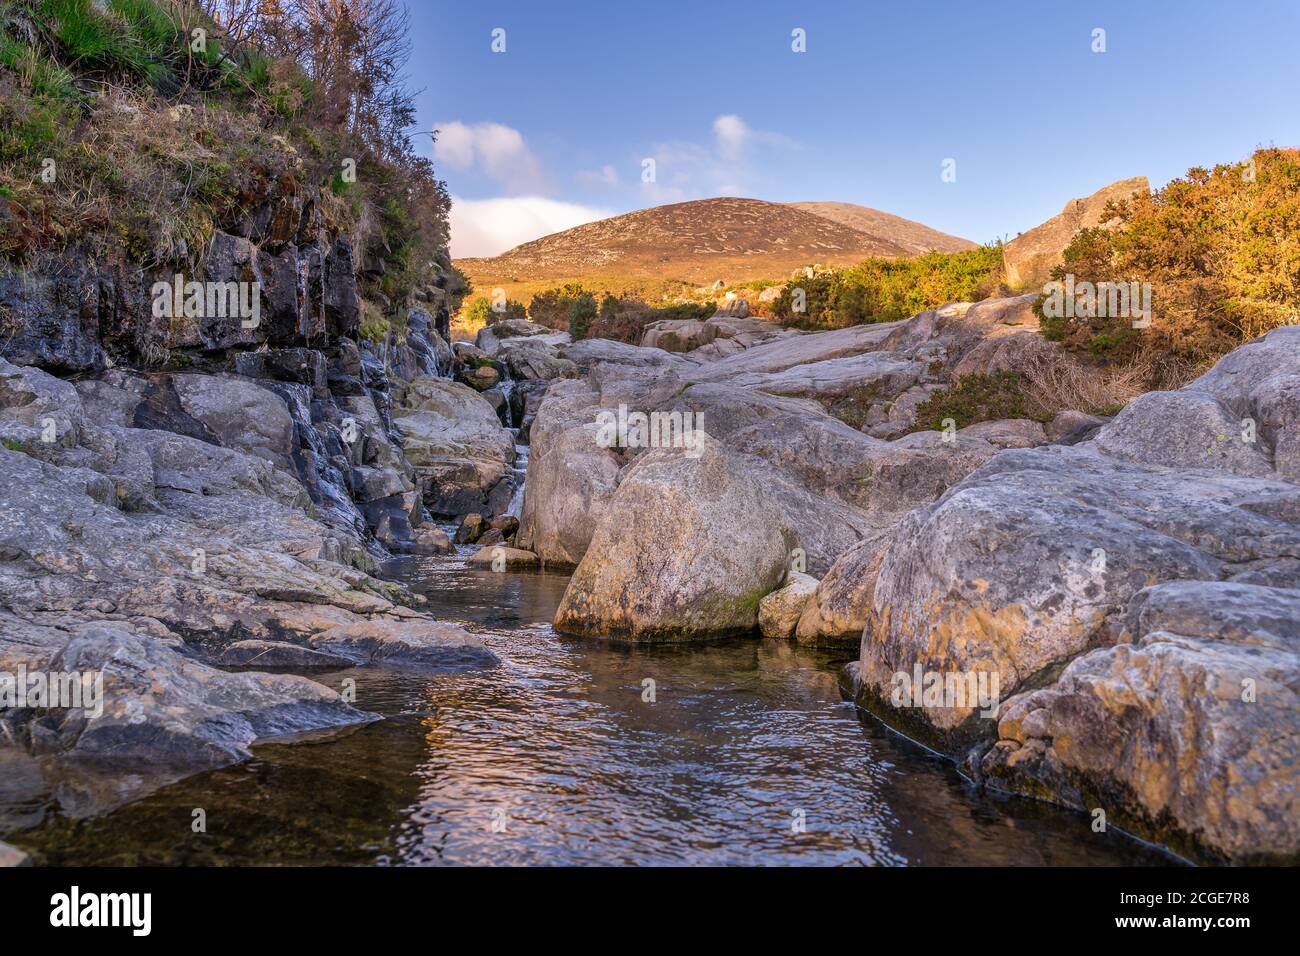 Mountain stream flowing between rocks with mountain peak of Slieve Donard, highlighted by sunlight in background, Mourne Mountains, Northern Ireland Stock Photo